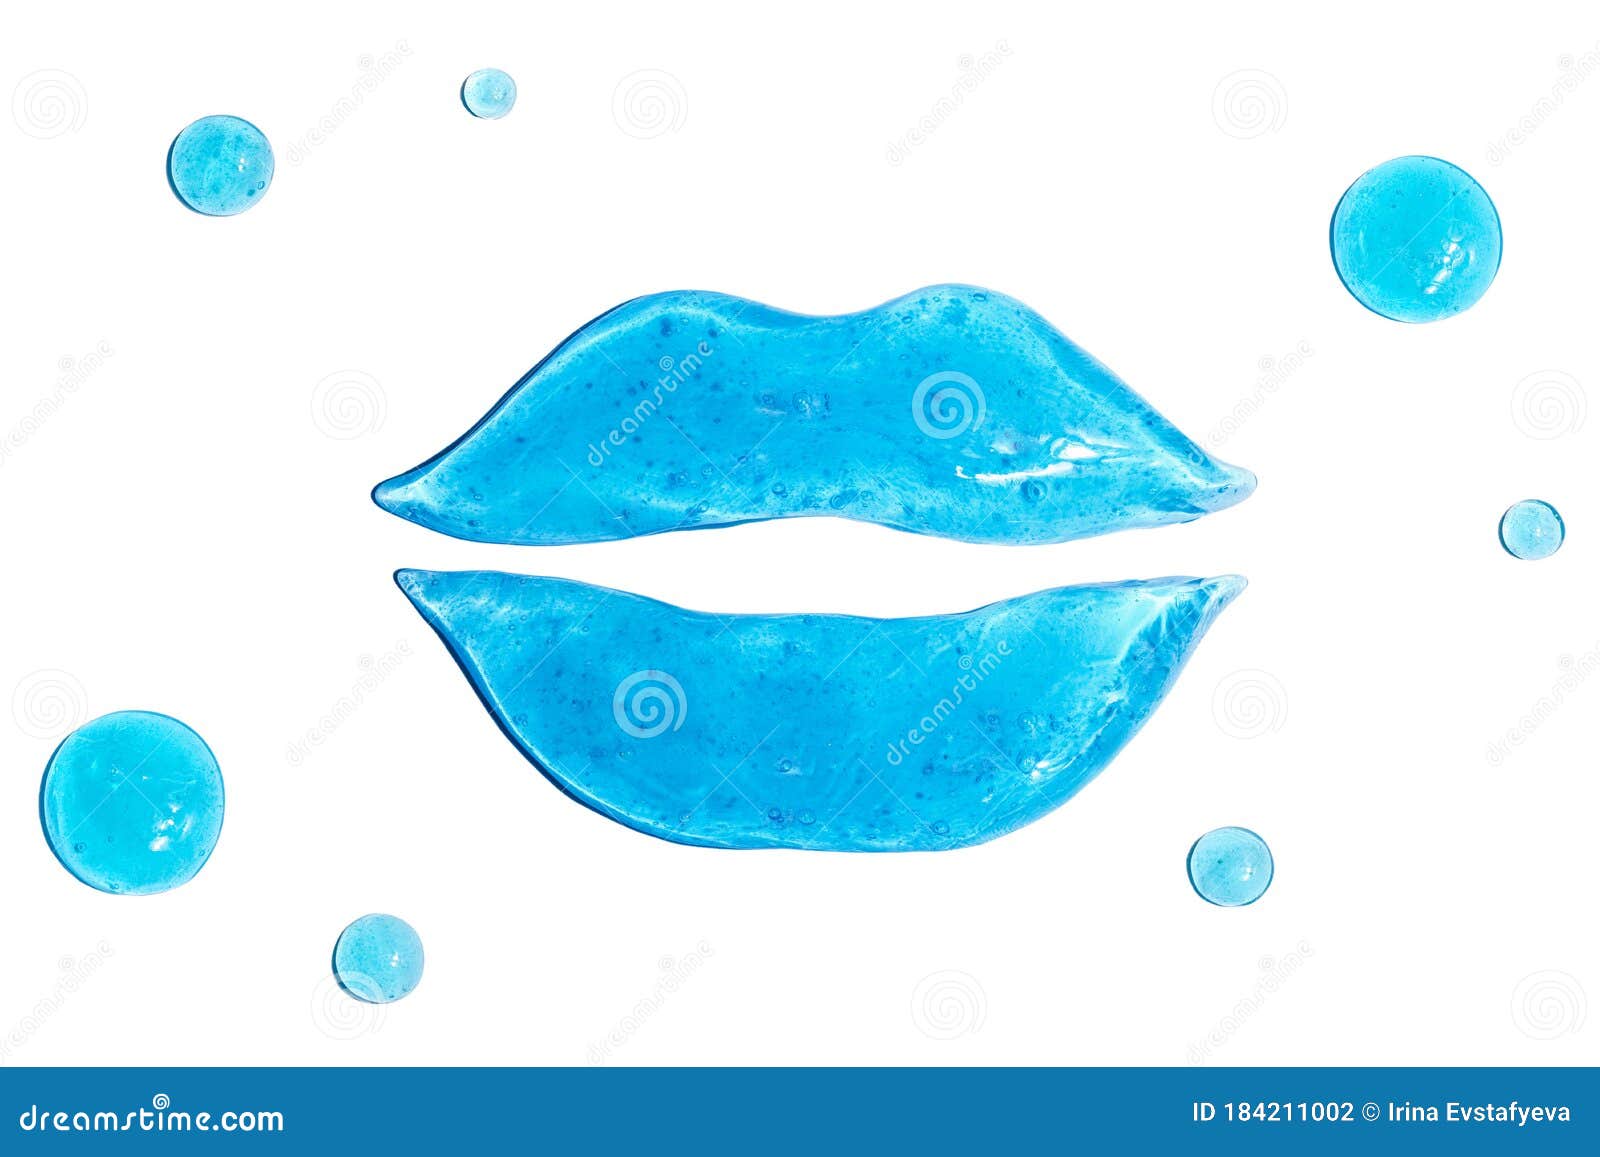 hyaluronic acid in the form of puffy lips. injection and cosmetic facial treatments